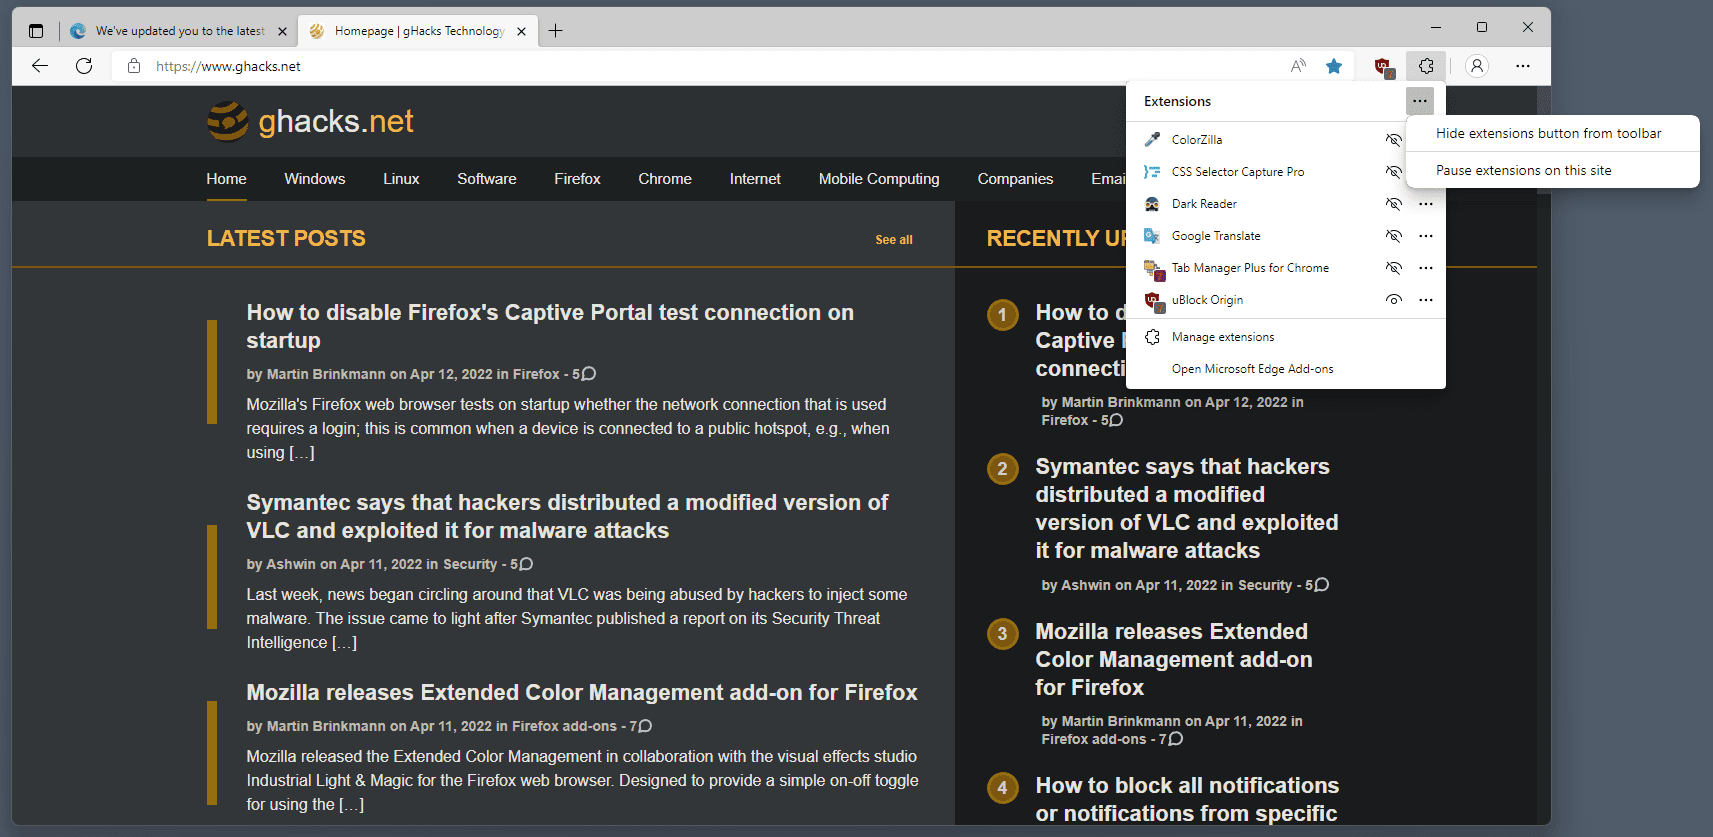 microsoft-edge-pause-extensions